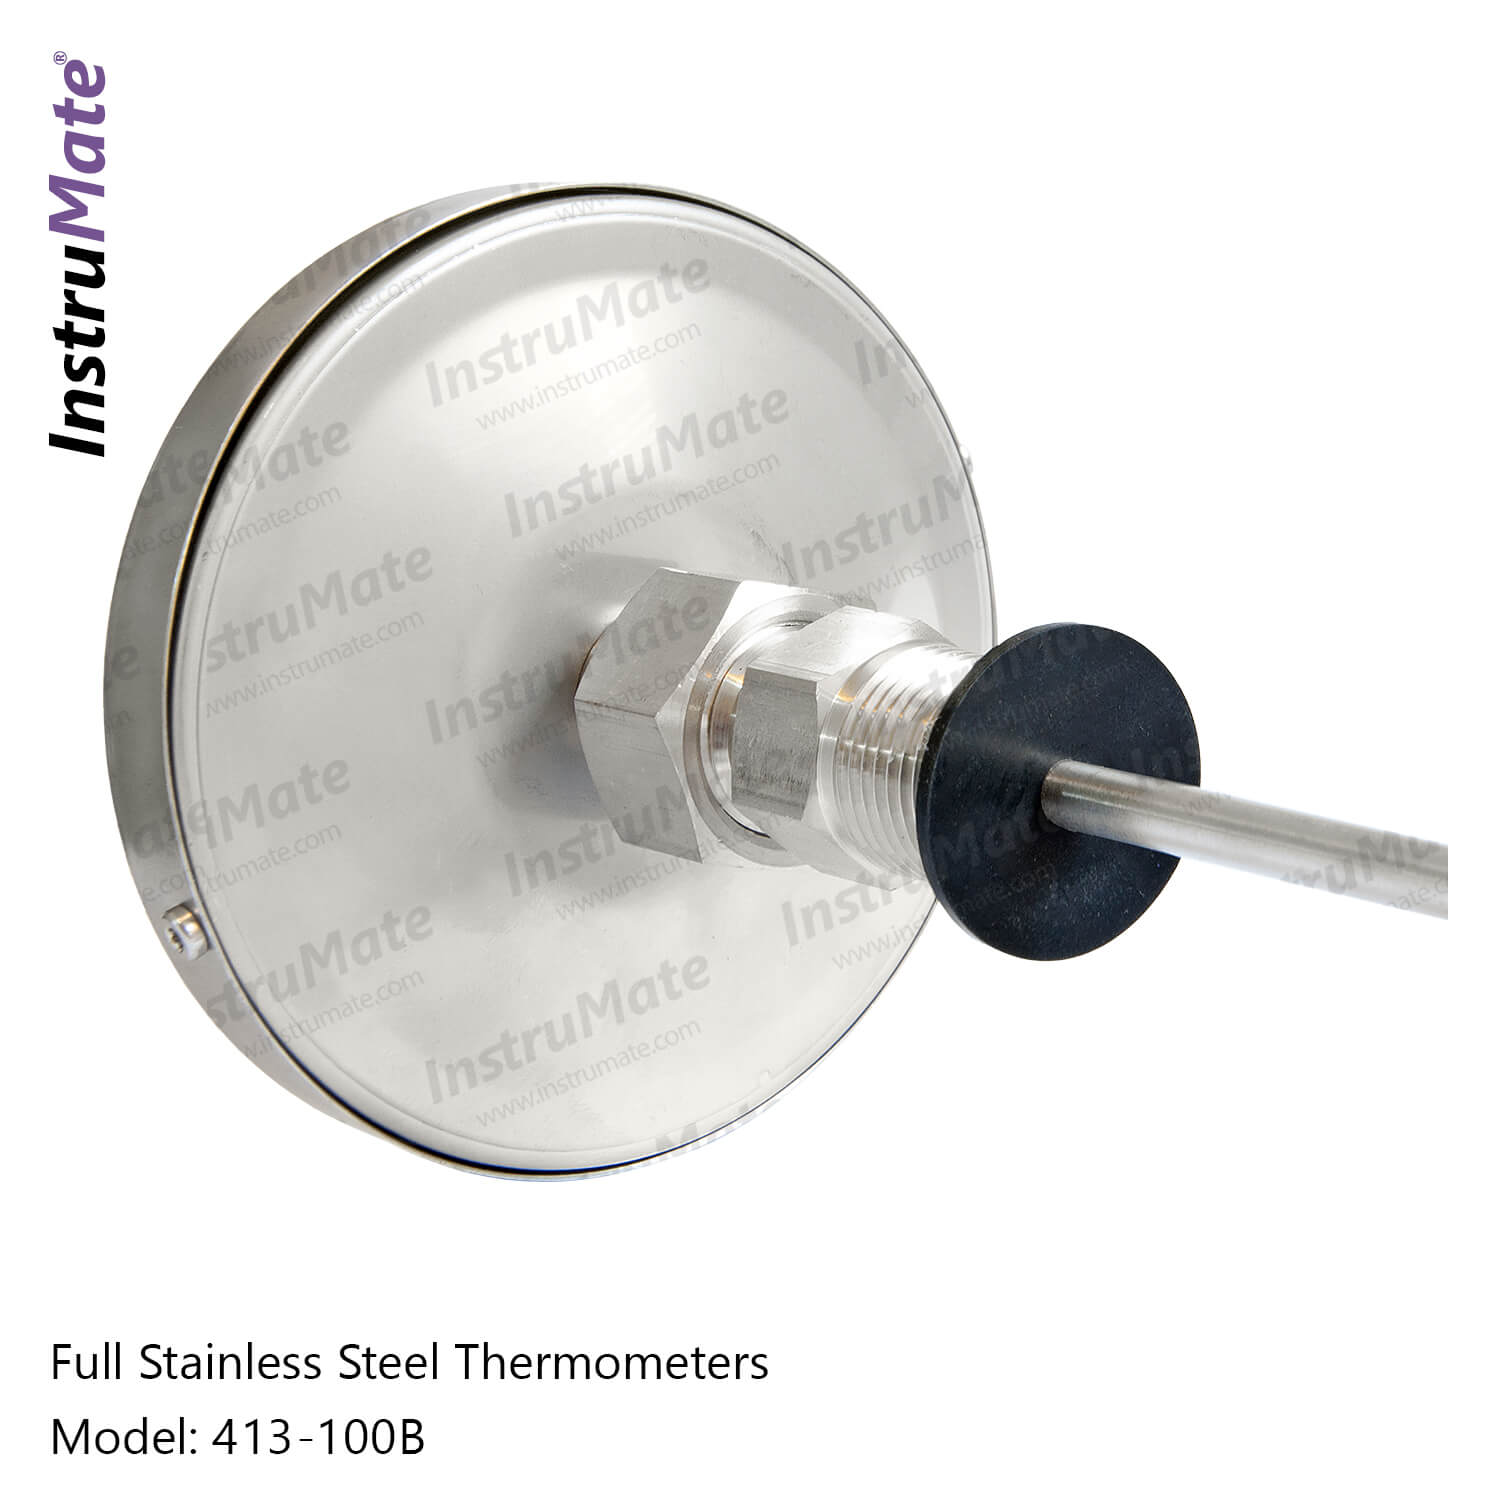 Industrial thermometer - 413 - InstruMate